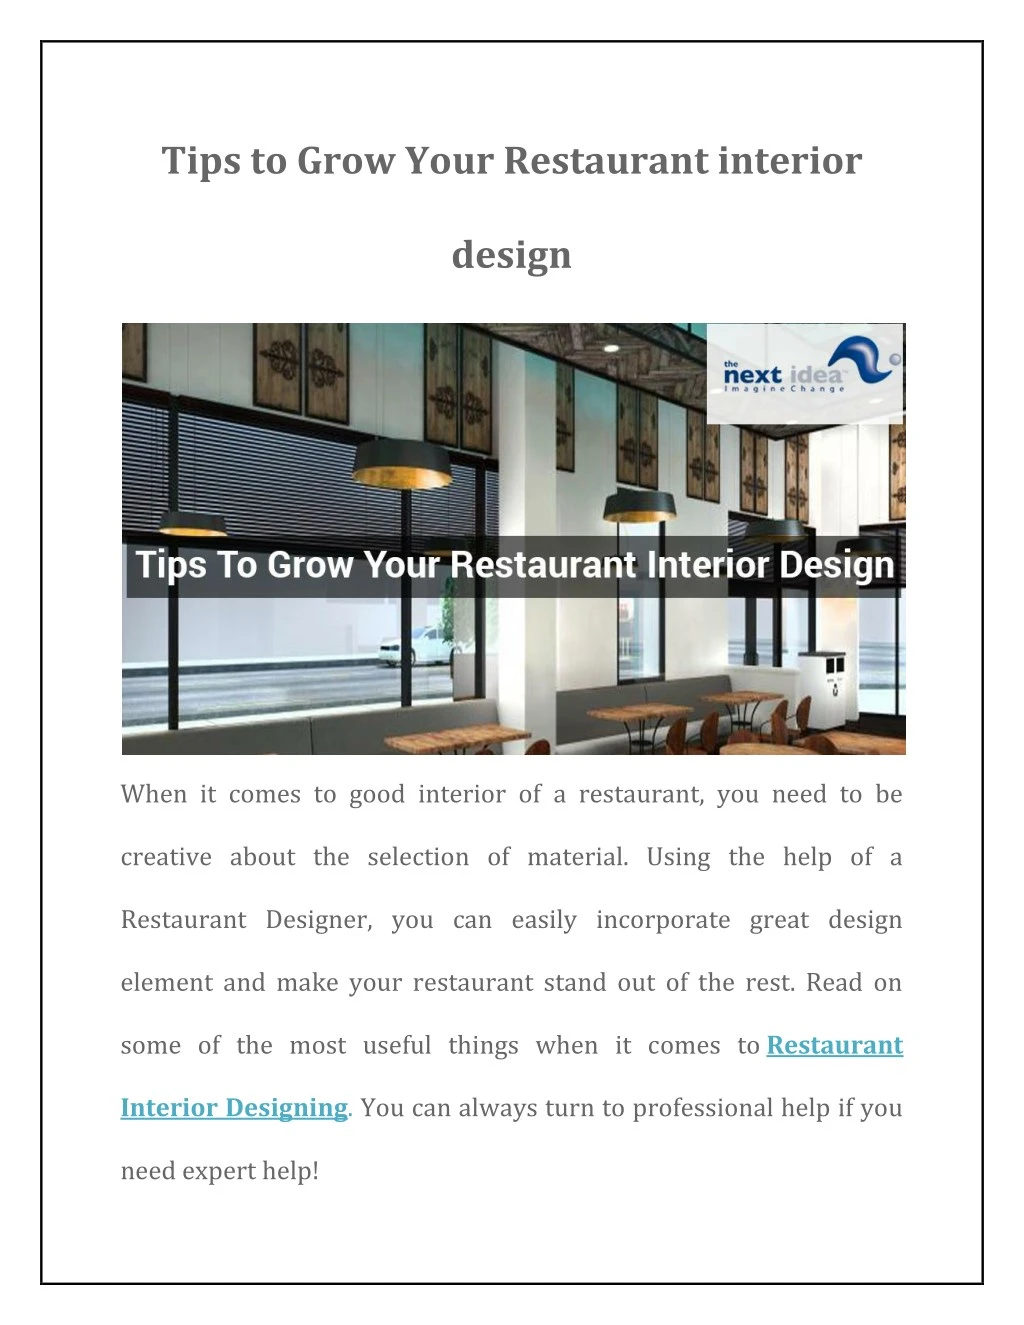 tips to grow your restaurant interior